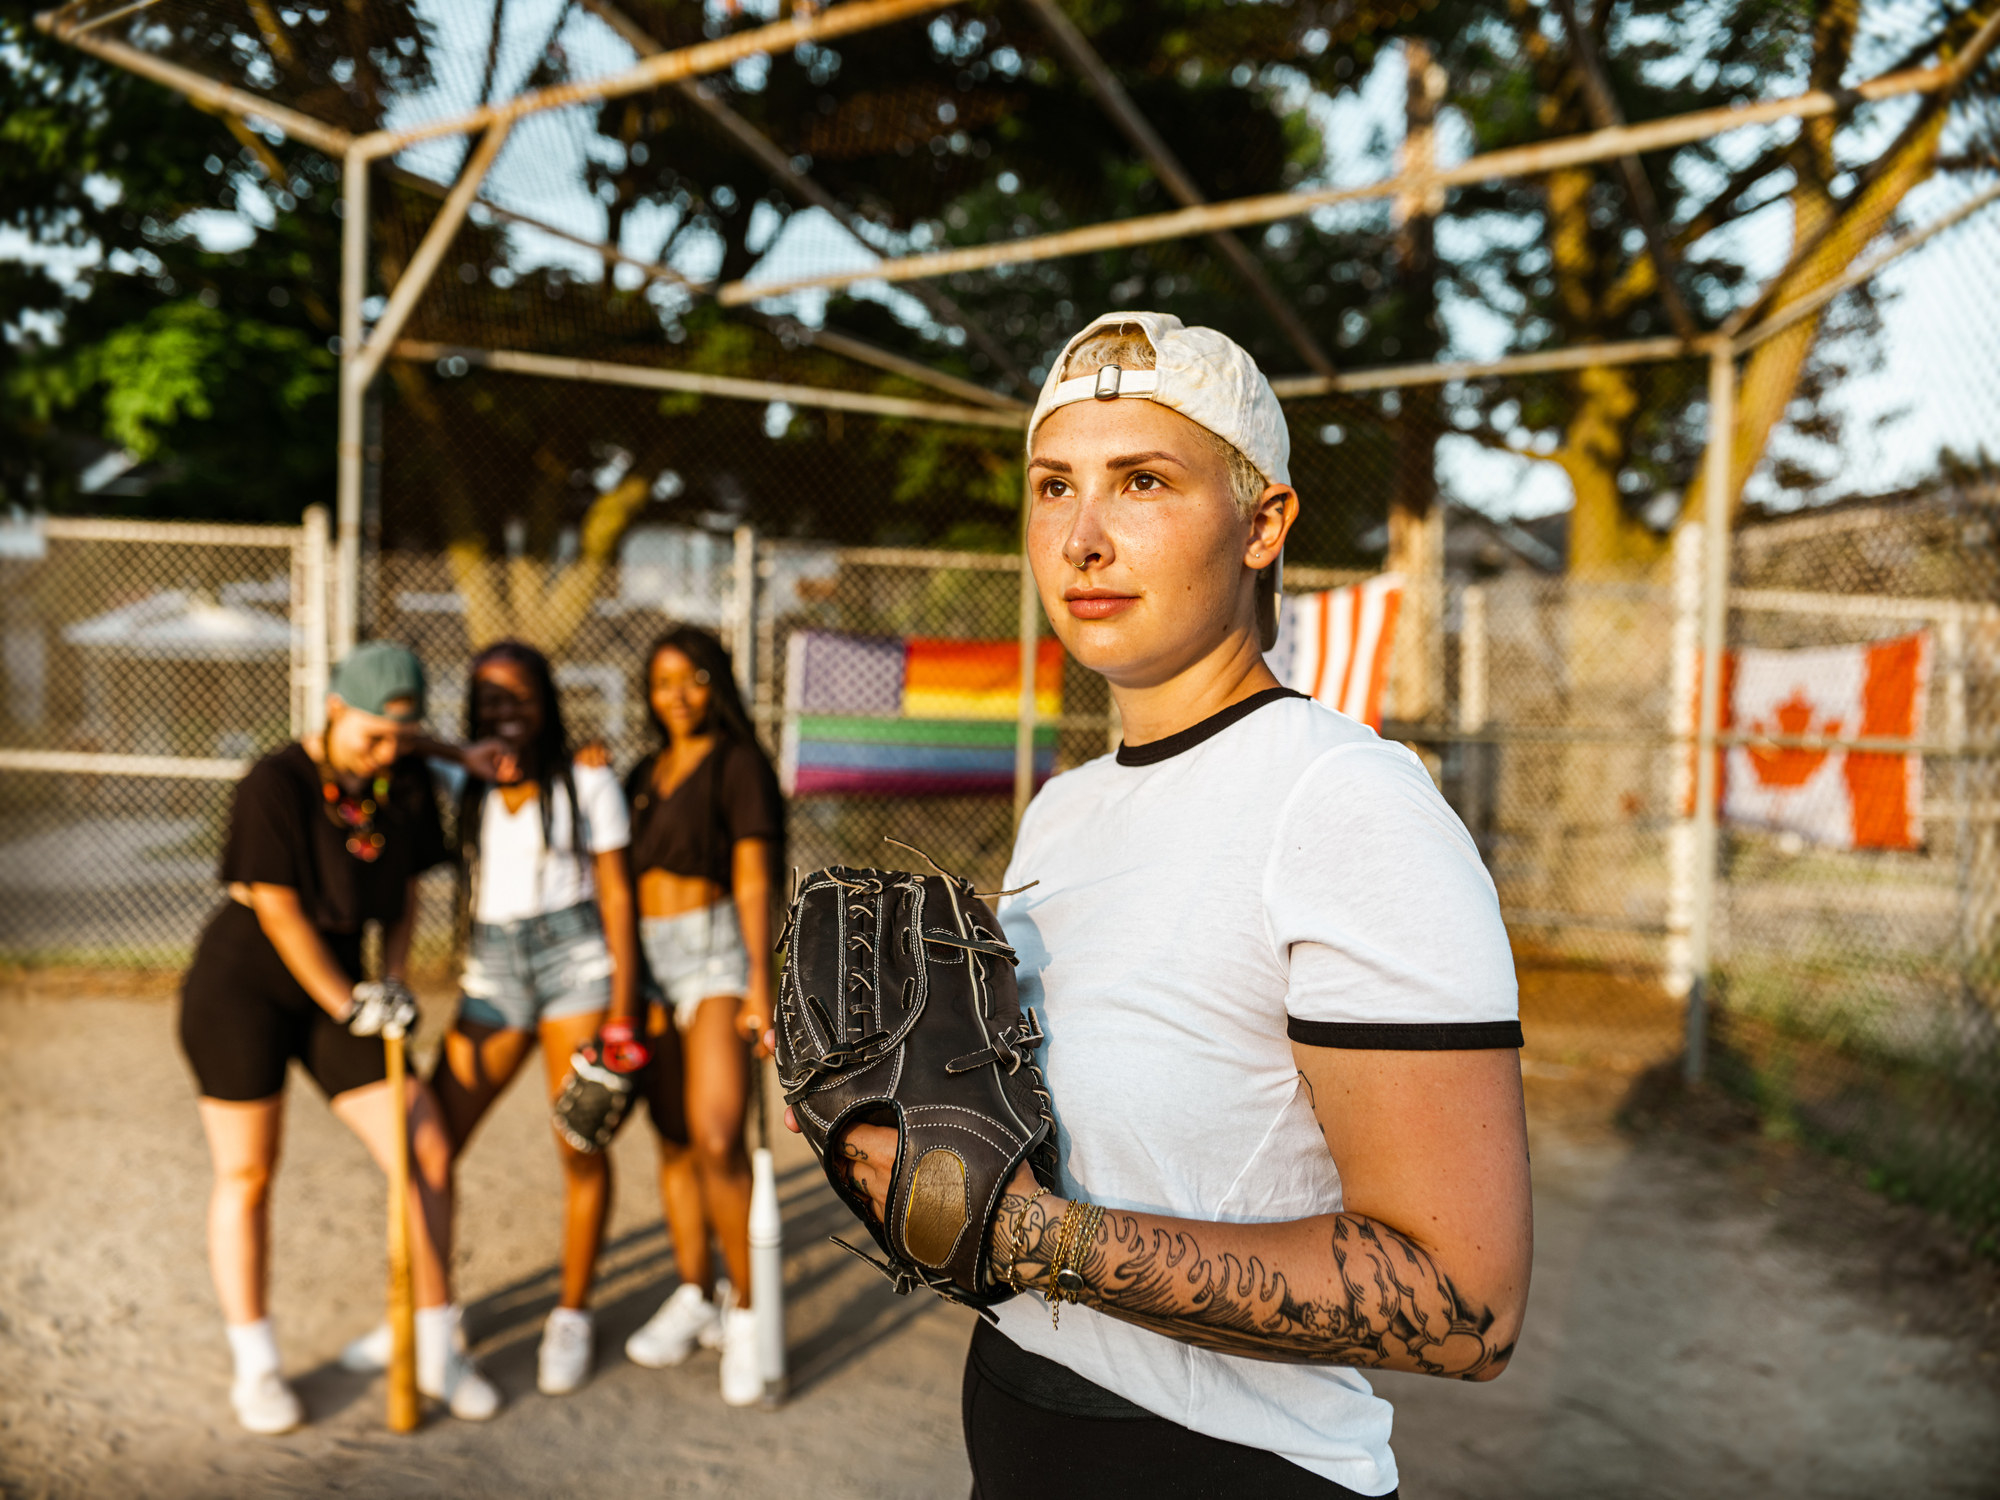 A queer softball queer